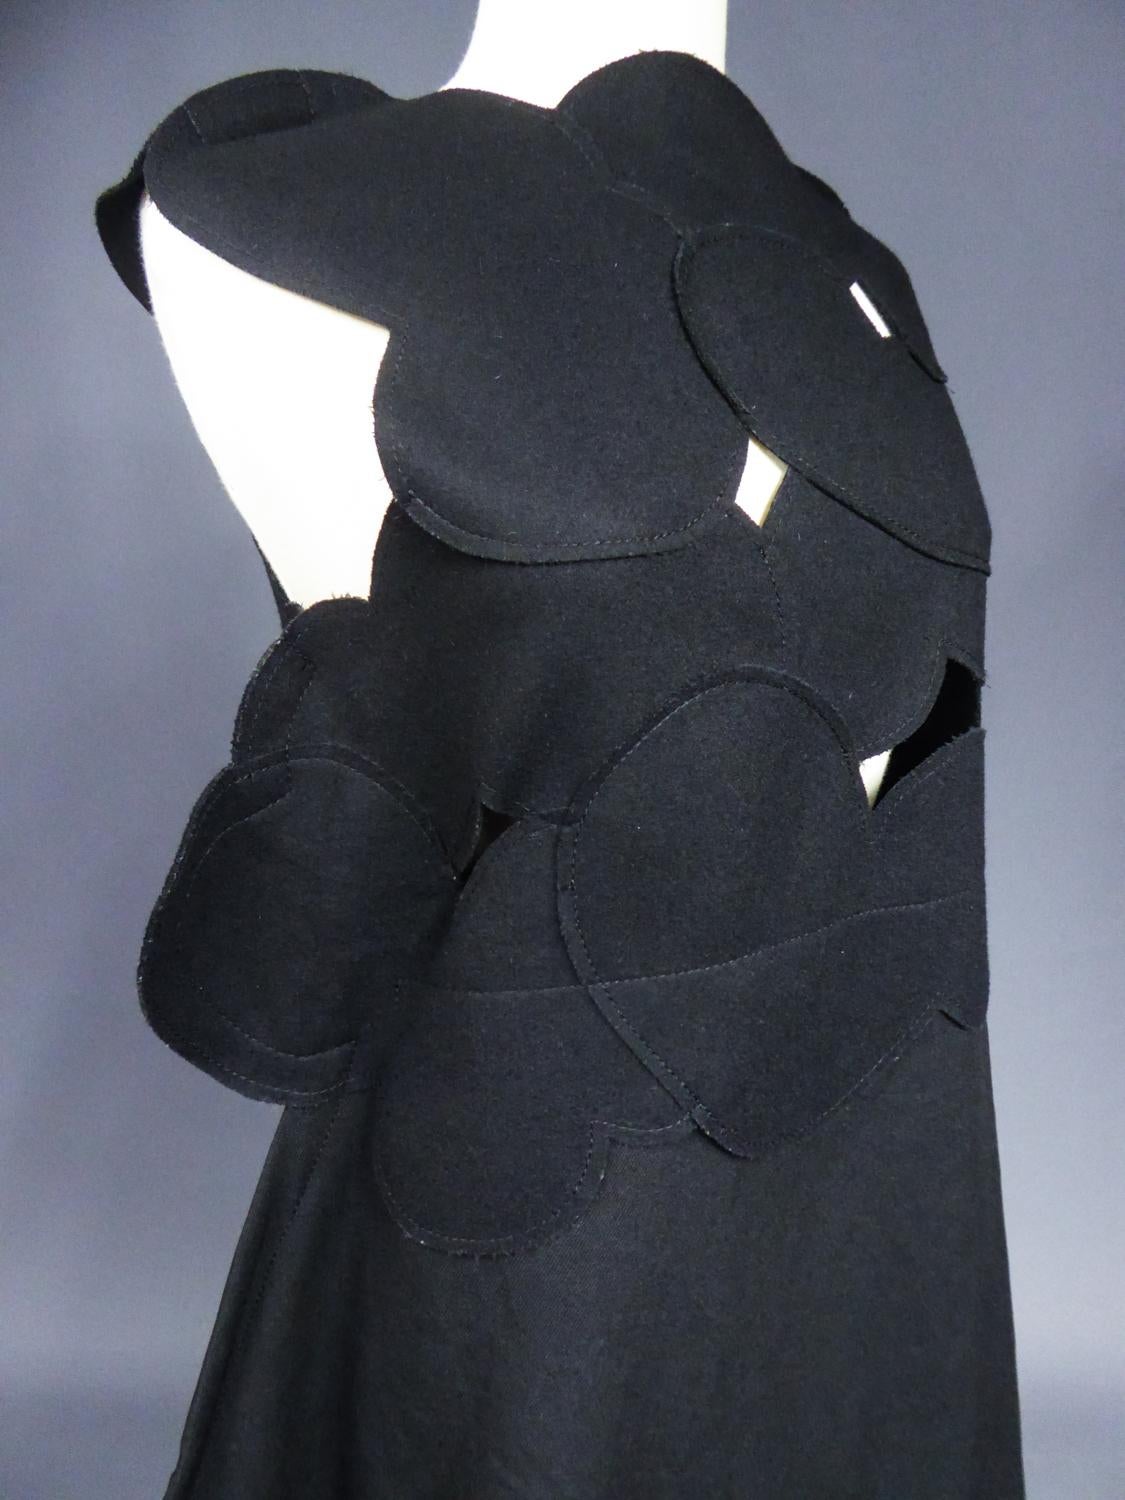 A Comme des Garcons Junya Watanabe Black Woollen Chasuble Dress Circa 2000 For Sale 5